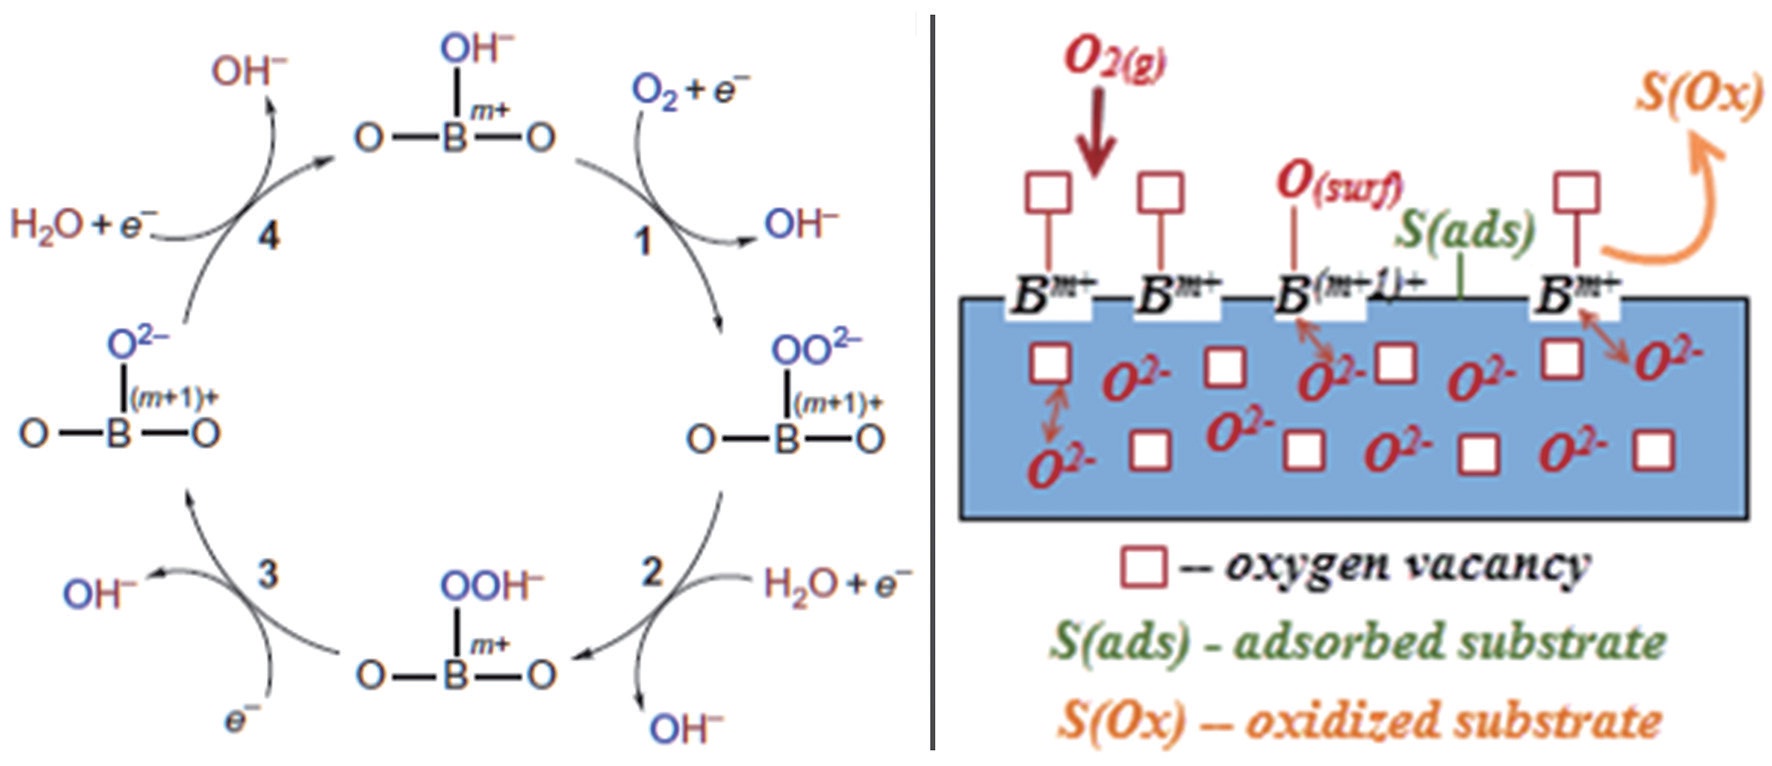 Mechanism of oxidation-reduction reactions on perovskite oxides: a) aqueous solution and b) gas phase.